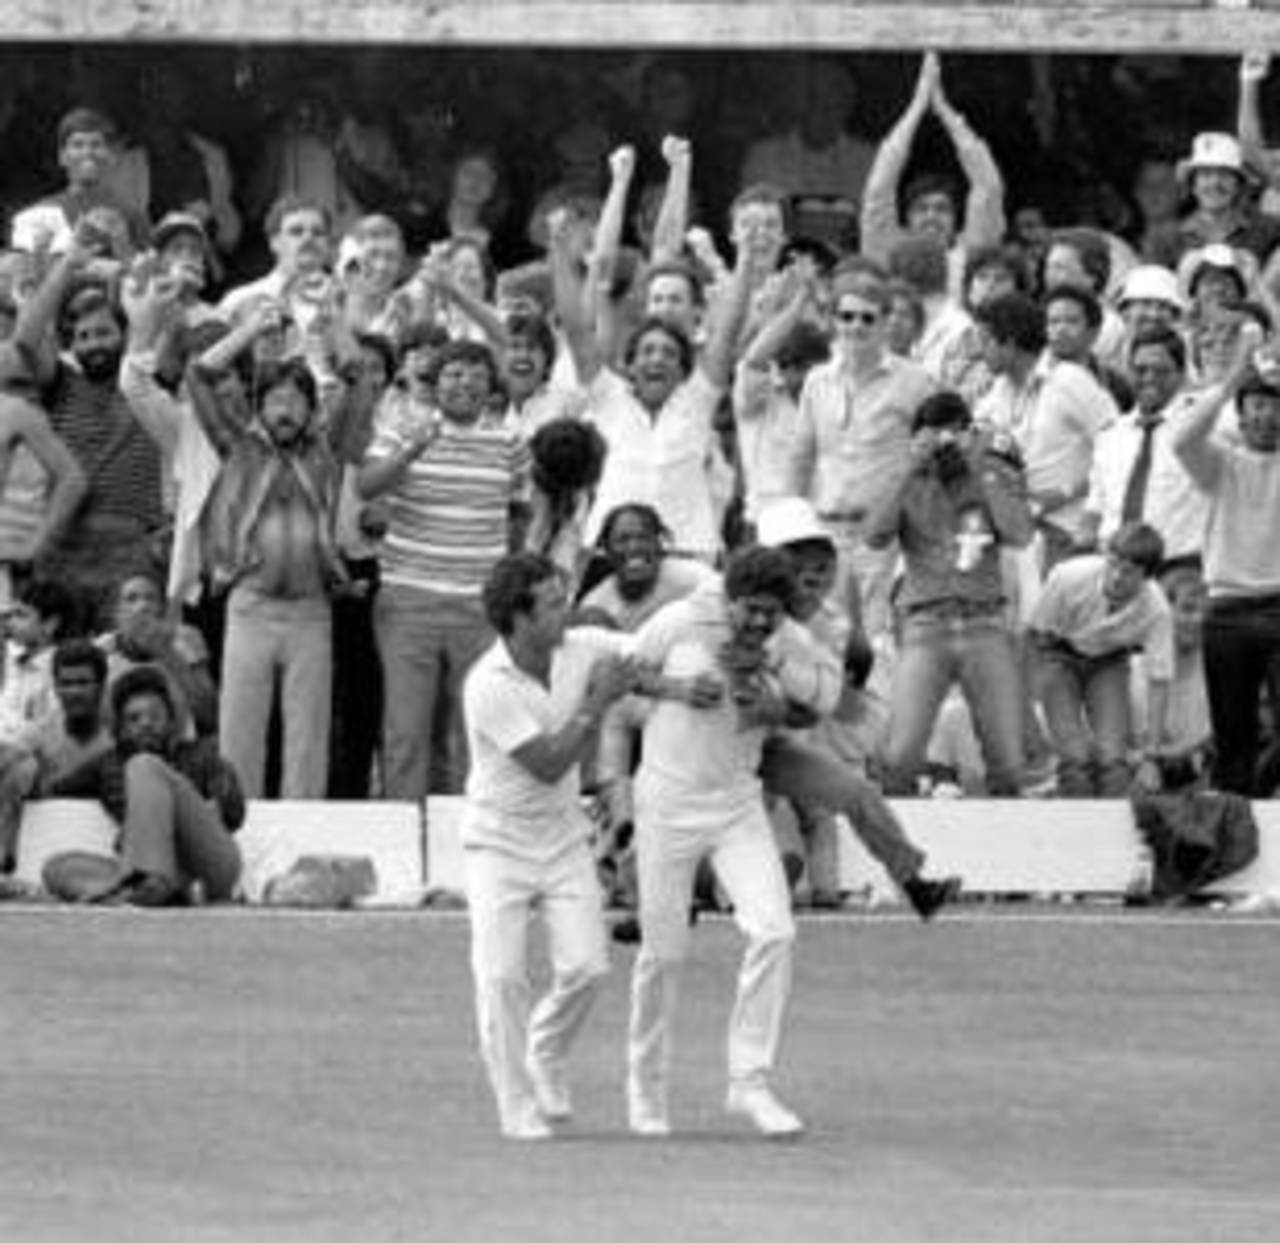 A fan leaps onto Kapil Dev's back after Kapil took a catch to dismiss Viv Richards in the final of the 1983 World Cup